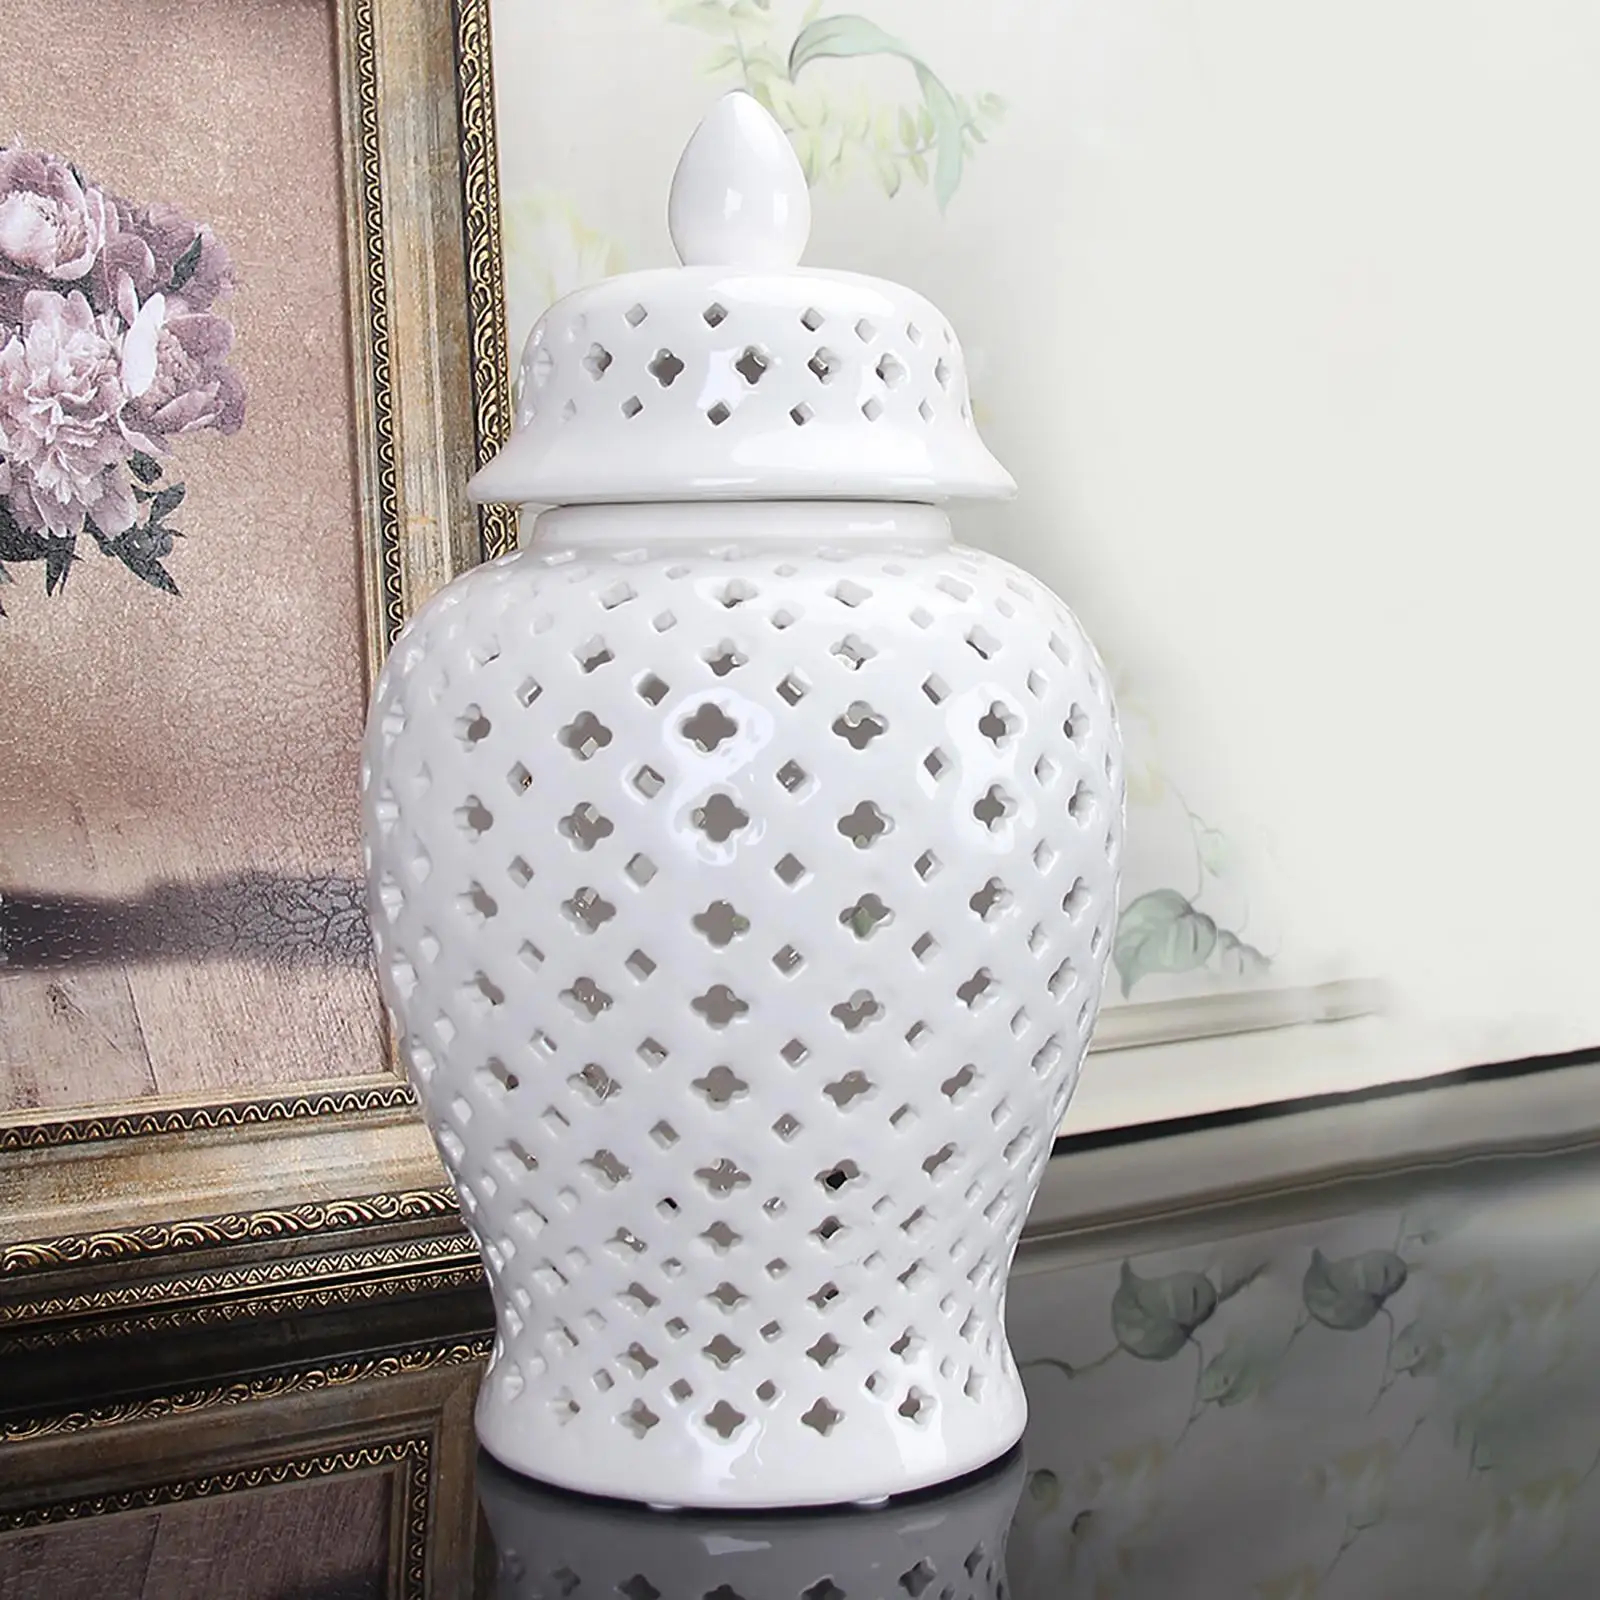 Ceramic Ginger Jar with Lid Light Luxury Collectable Handicraft Pierced Lantern Oriental for Display Decoration Gift Ornament